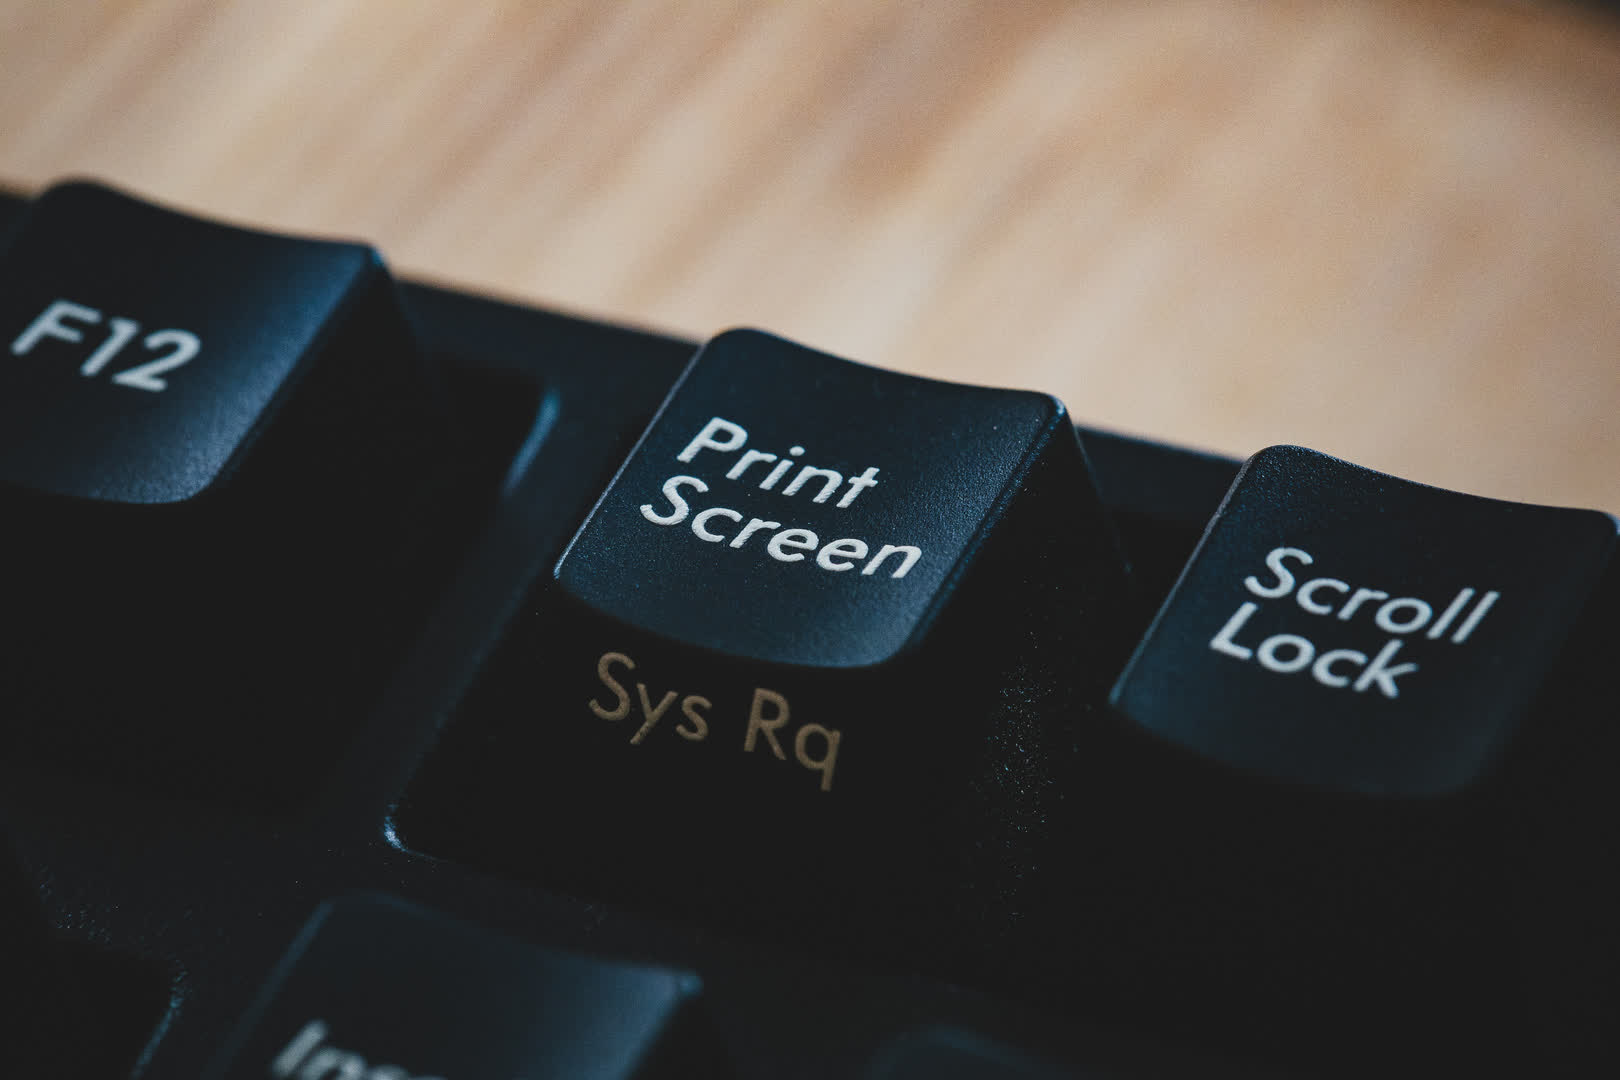 Microsoft set to change the Print Screen button so it opens the Snipping Tool in Windows 11